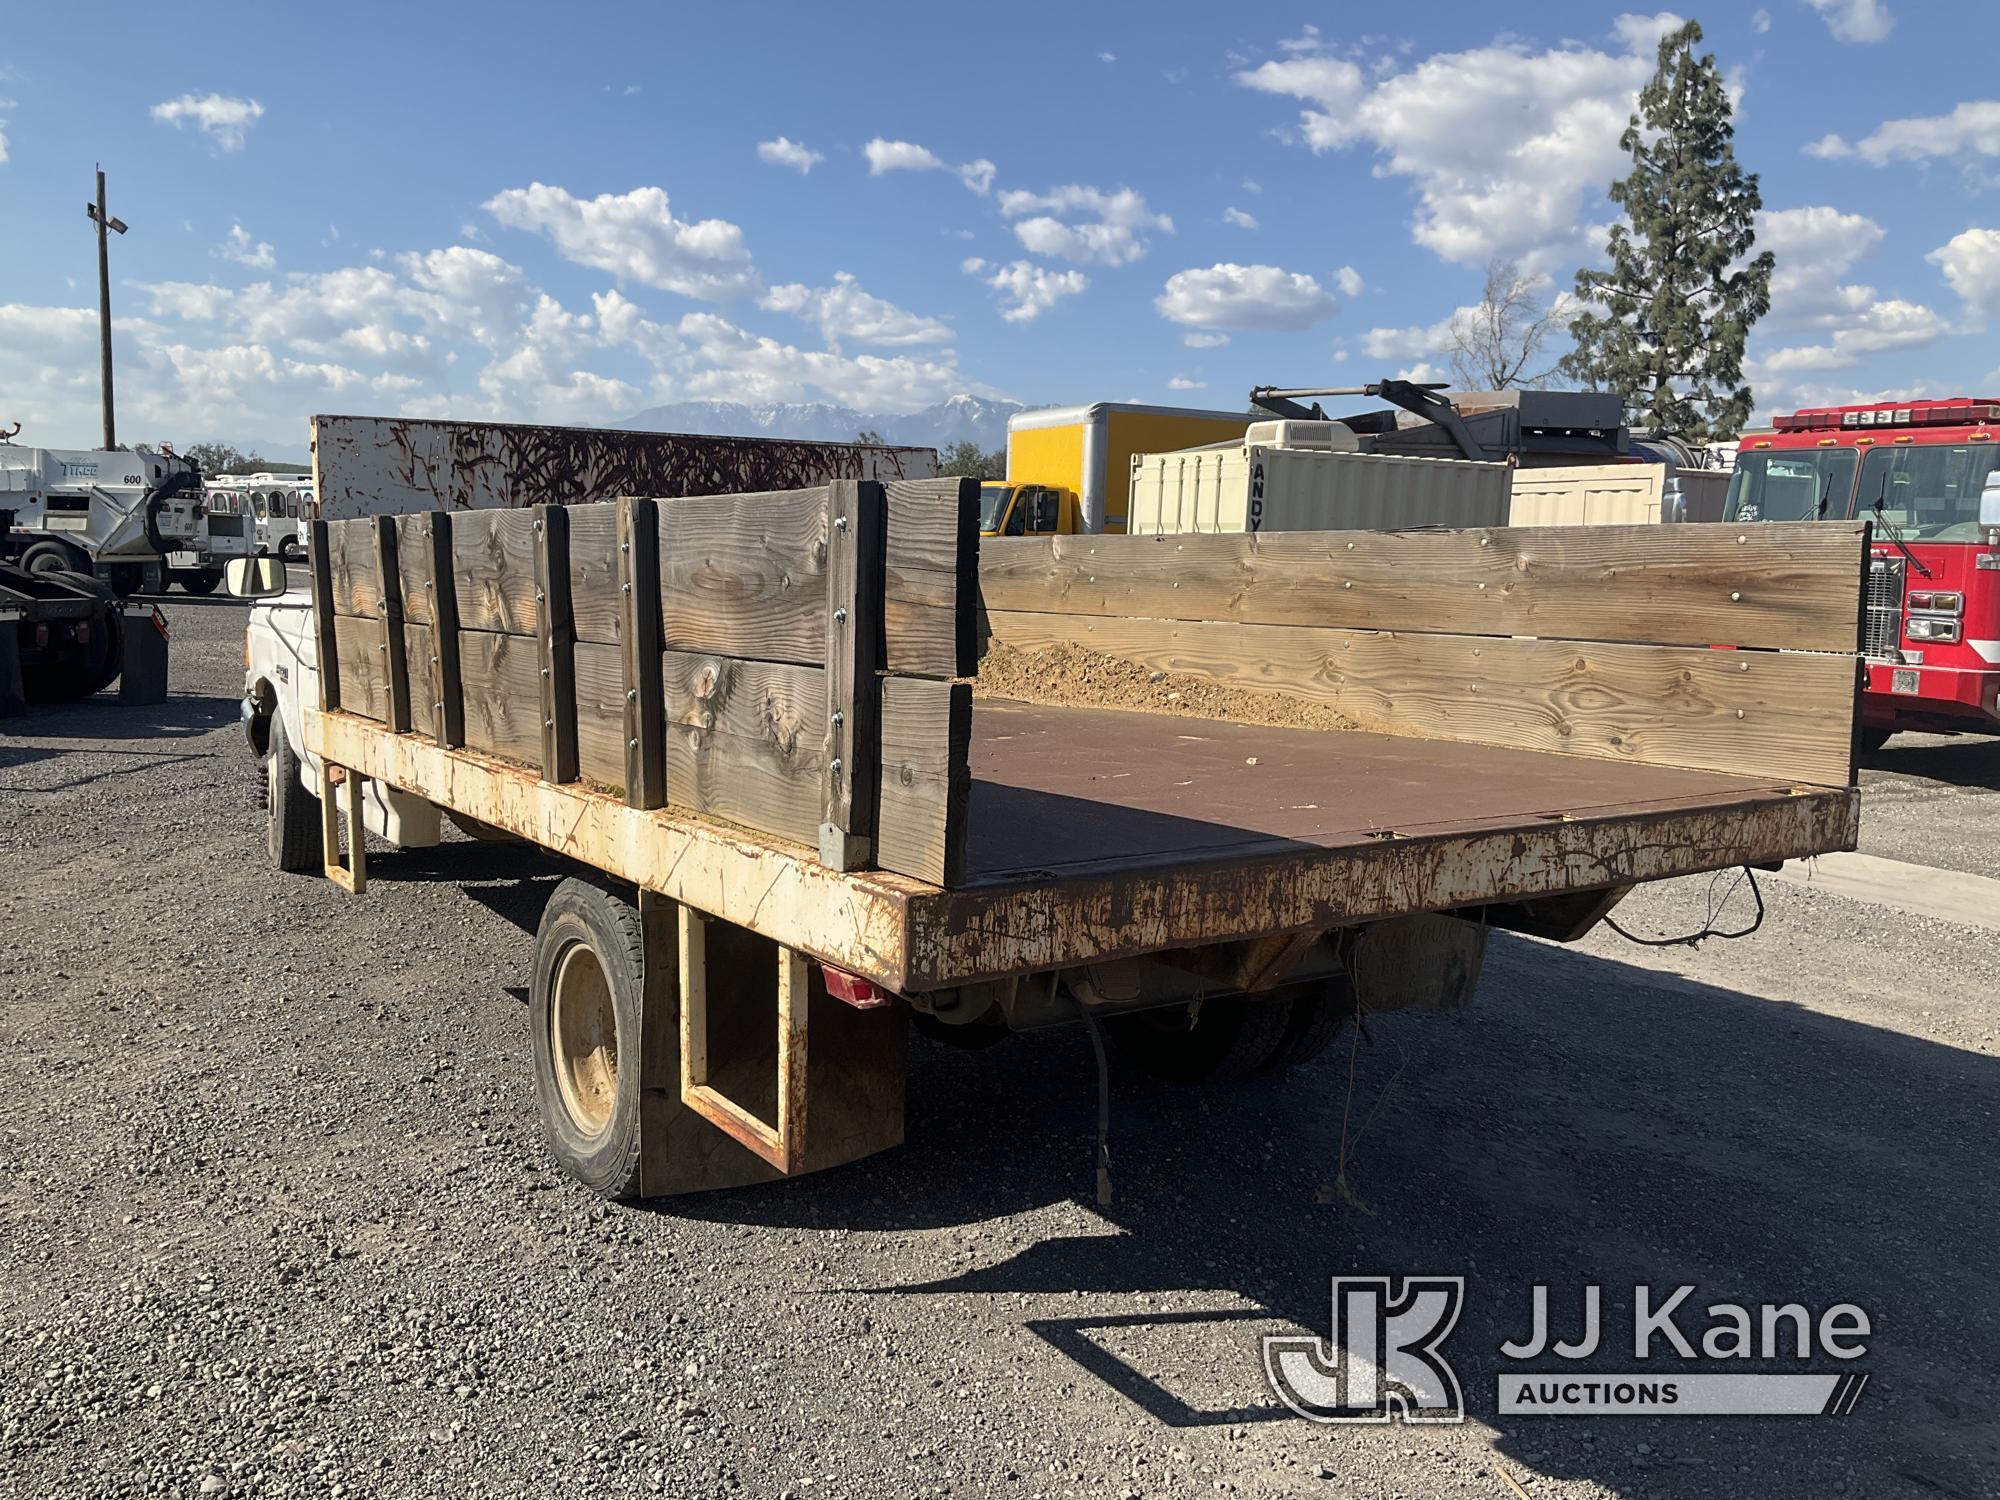 (Jurupa Valley, CA) 1989 Ford F350 Flatbed Truck Runs rough, Moves & Operates, Squishy Brake Pedal,